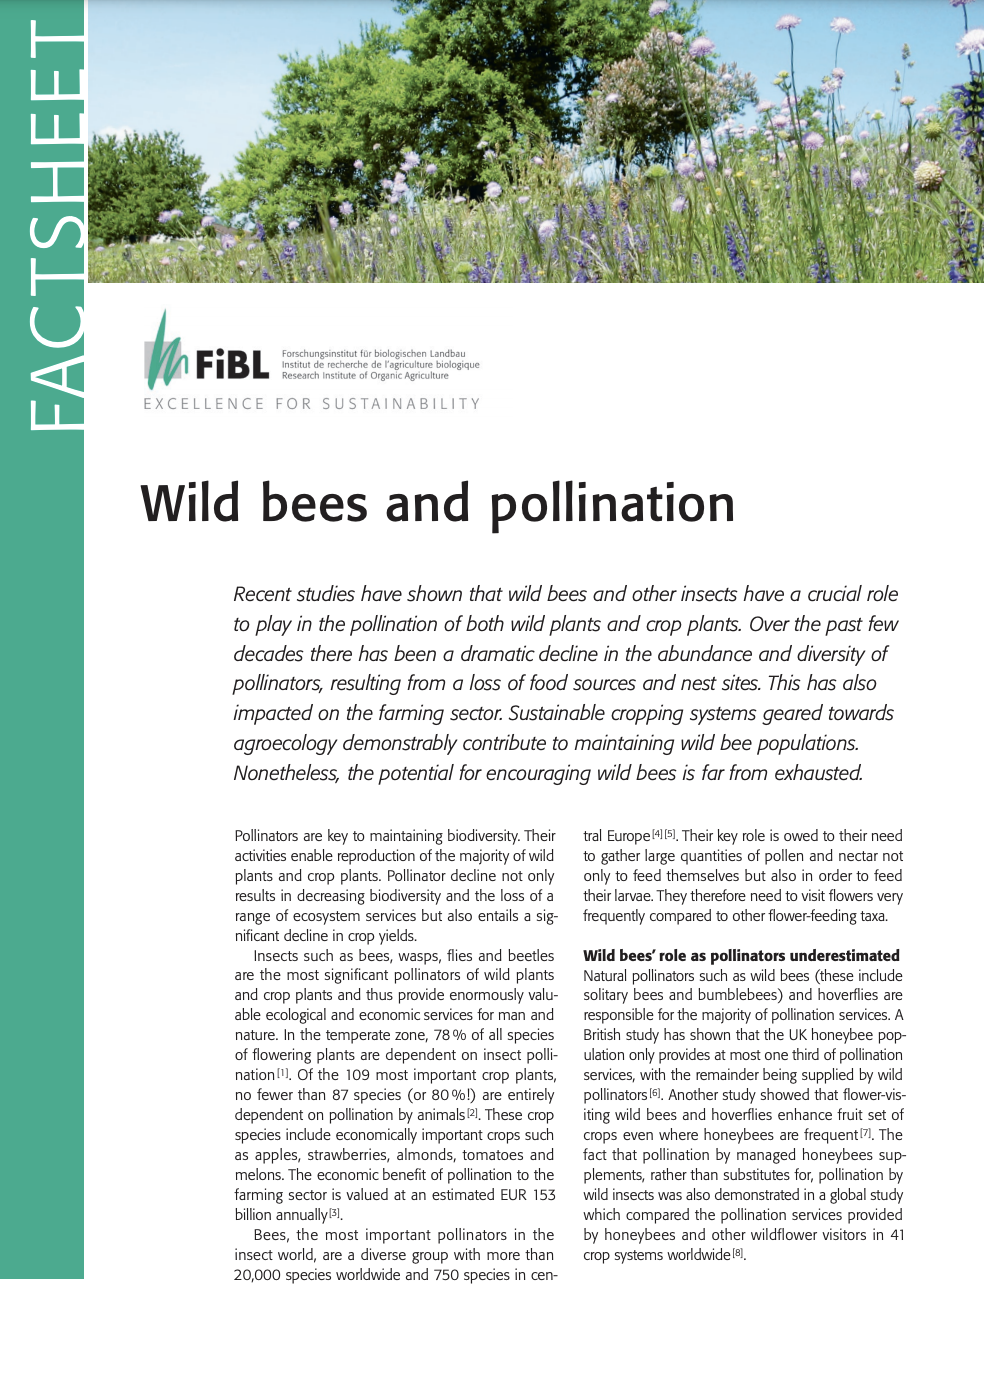 Wild bees and pollination